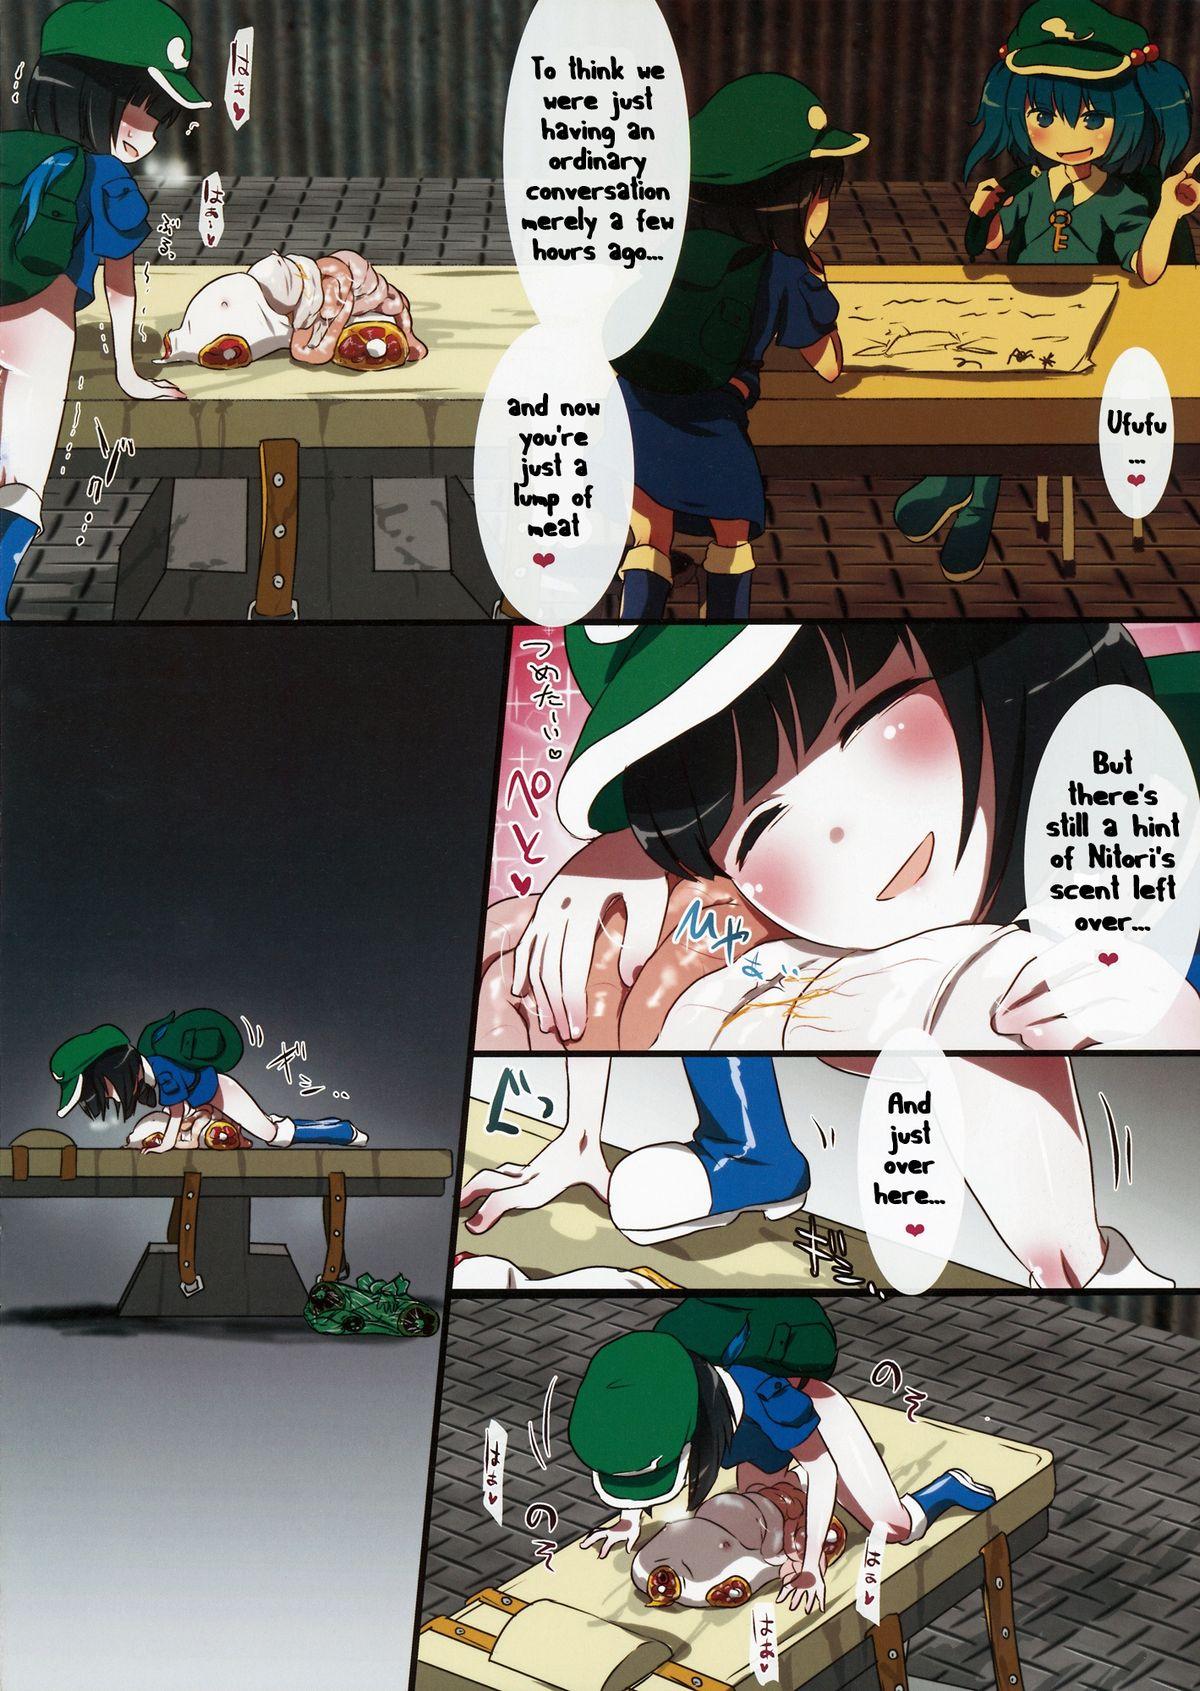 Pussy Licking 0210564801 - Touhou project Movie - Page 10